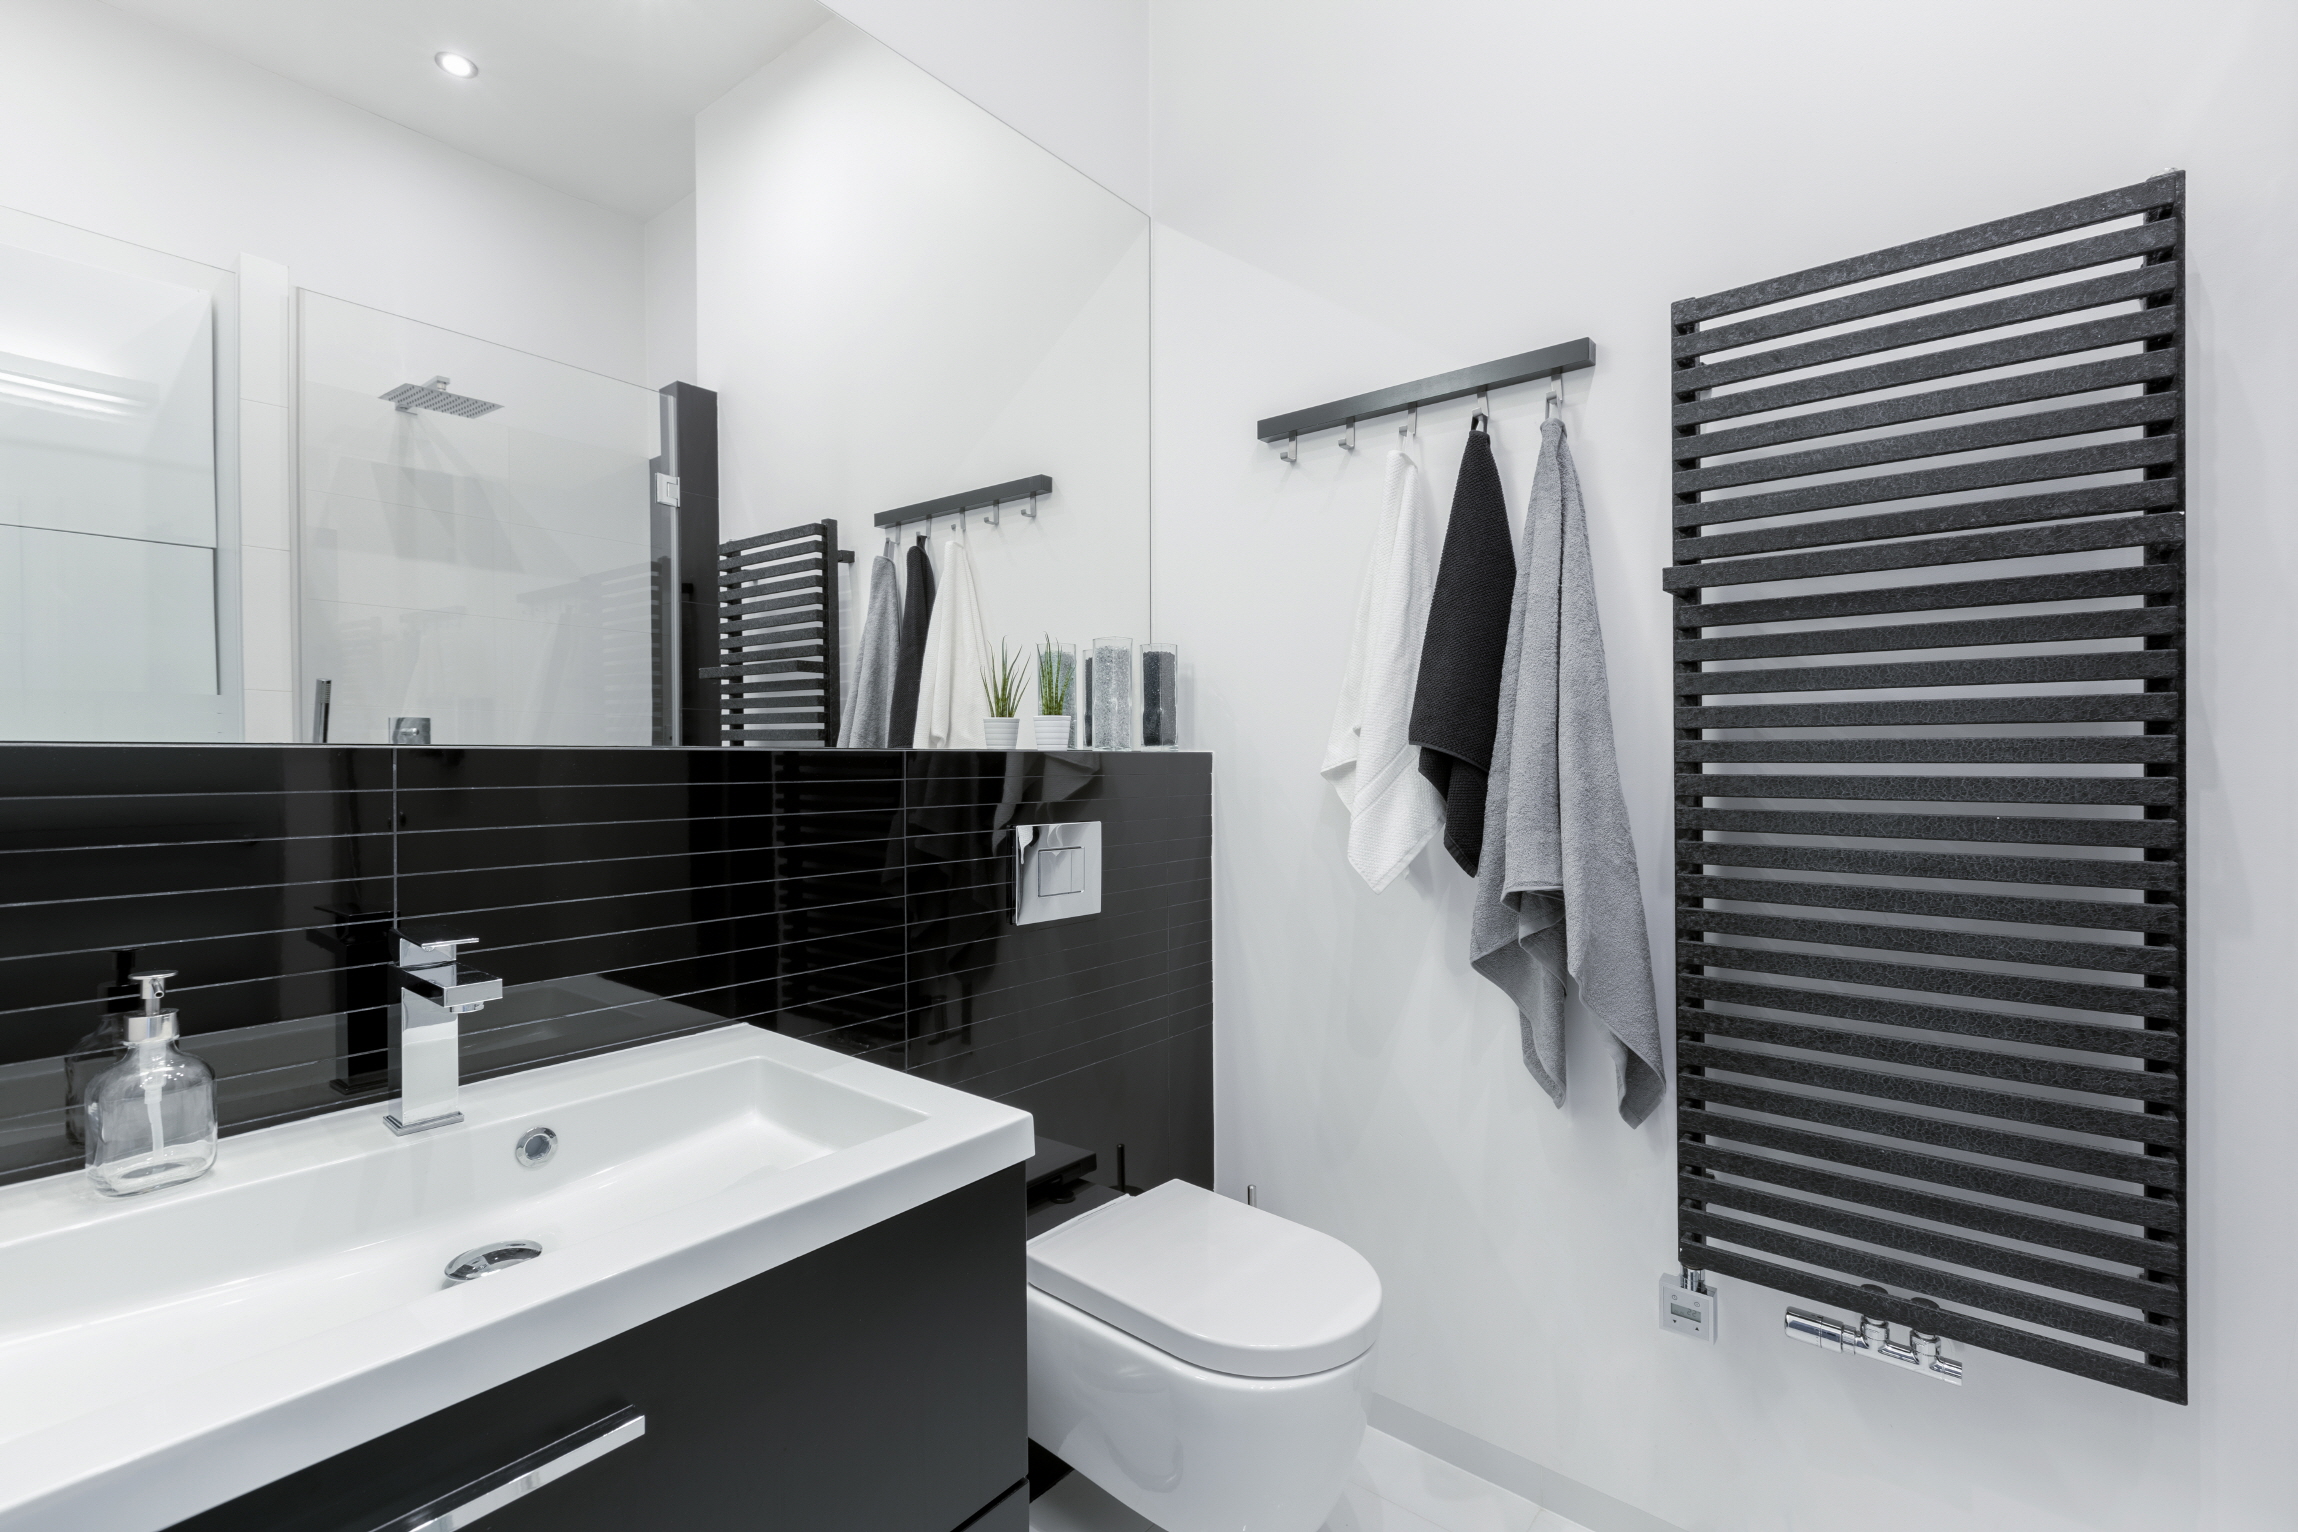 Contrasting colors in small bathrooms, like black and white or navy and gray, create a dynamic atmosphere.